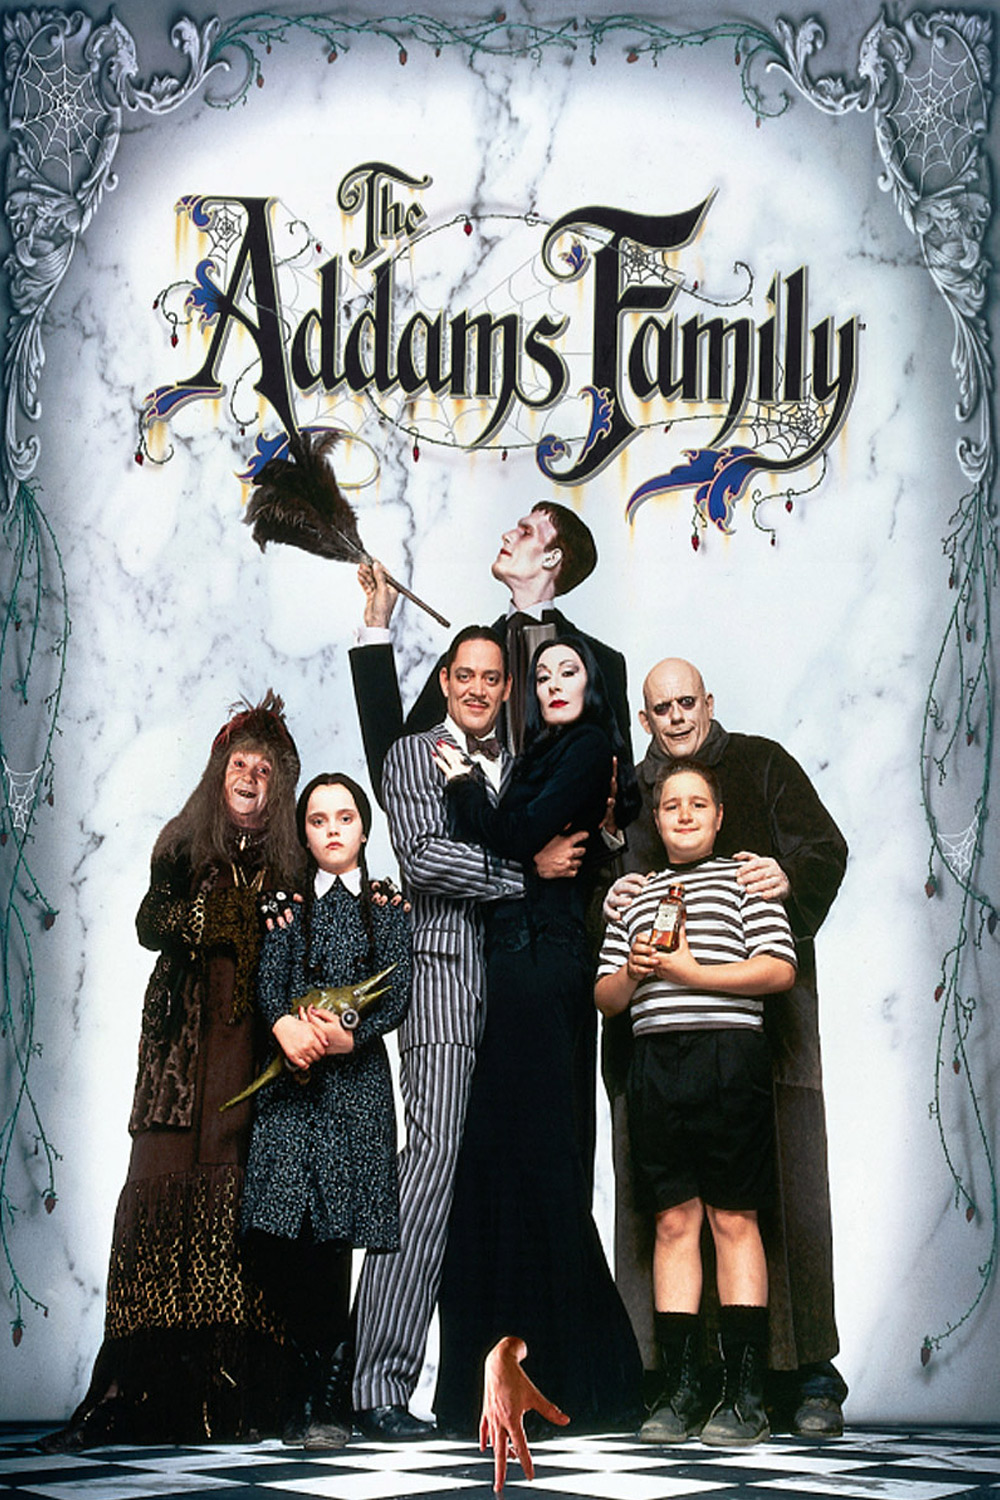 Cemetery Man   The Addams Family Double Feature